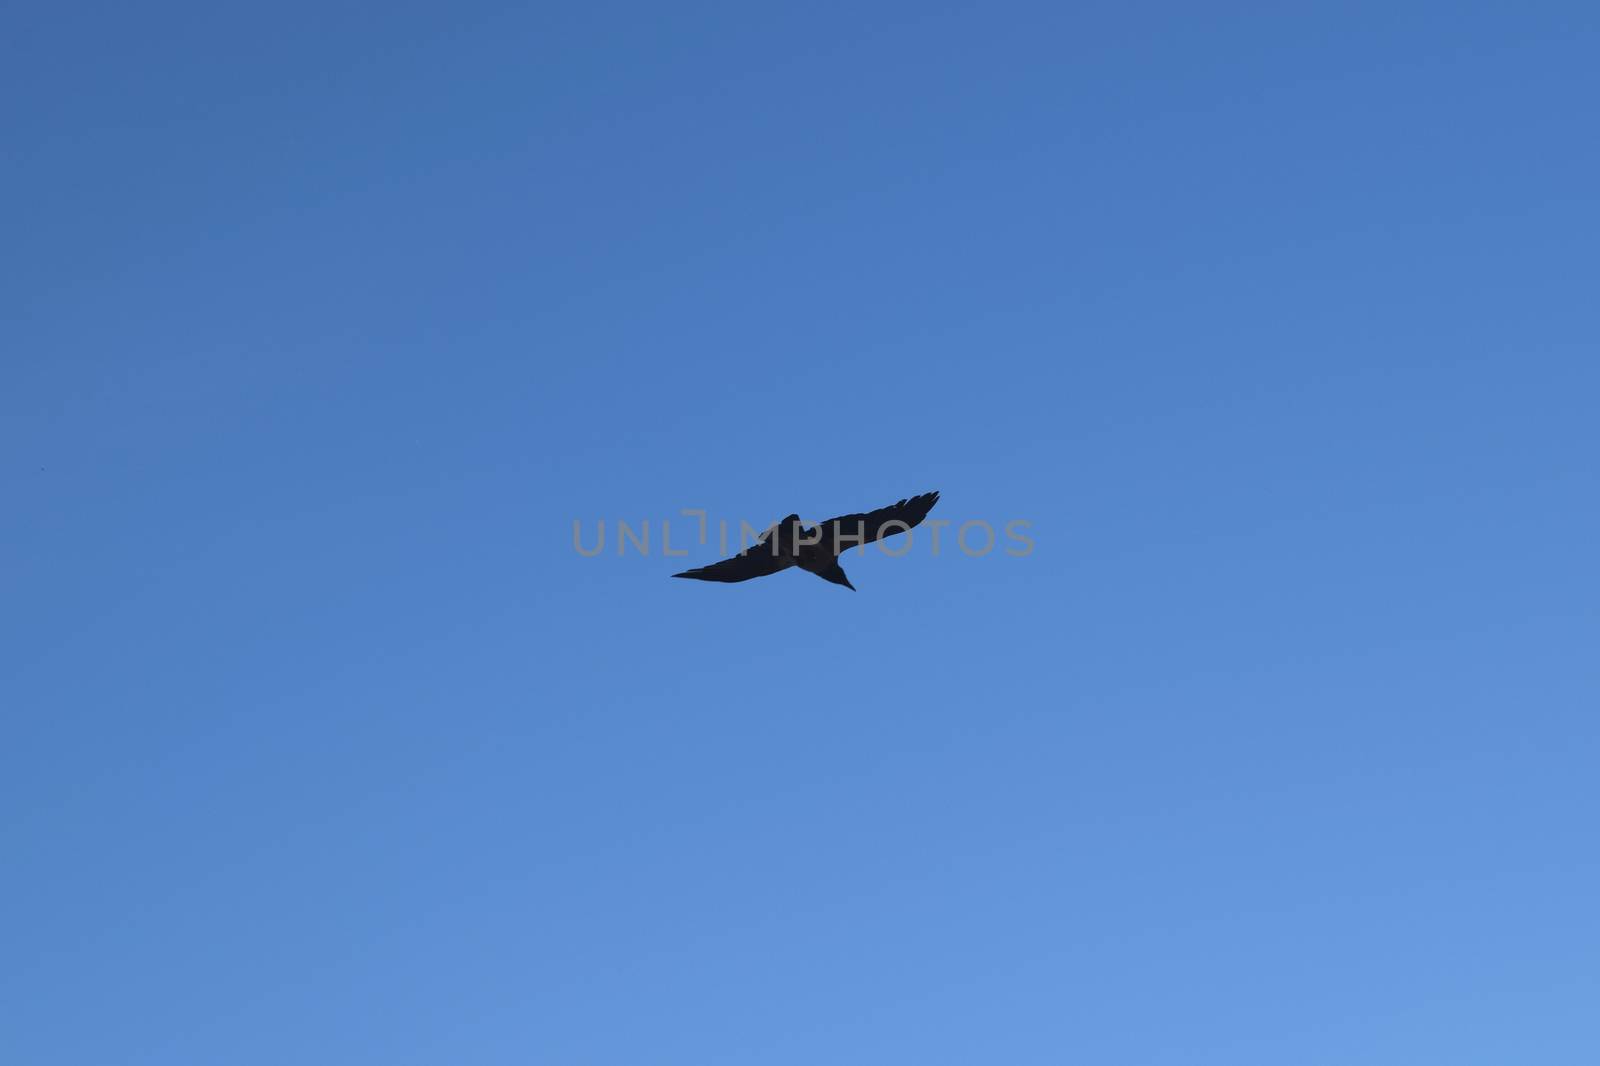 A bird in the sky flying at an altitude of